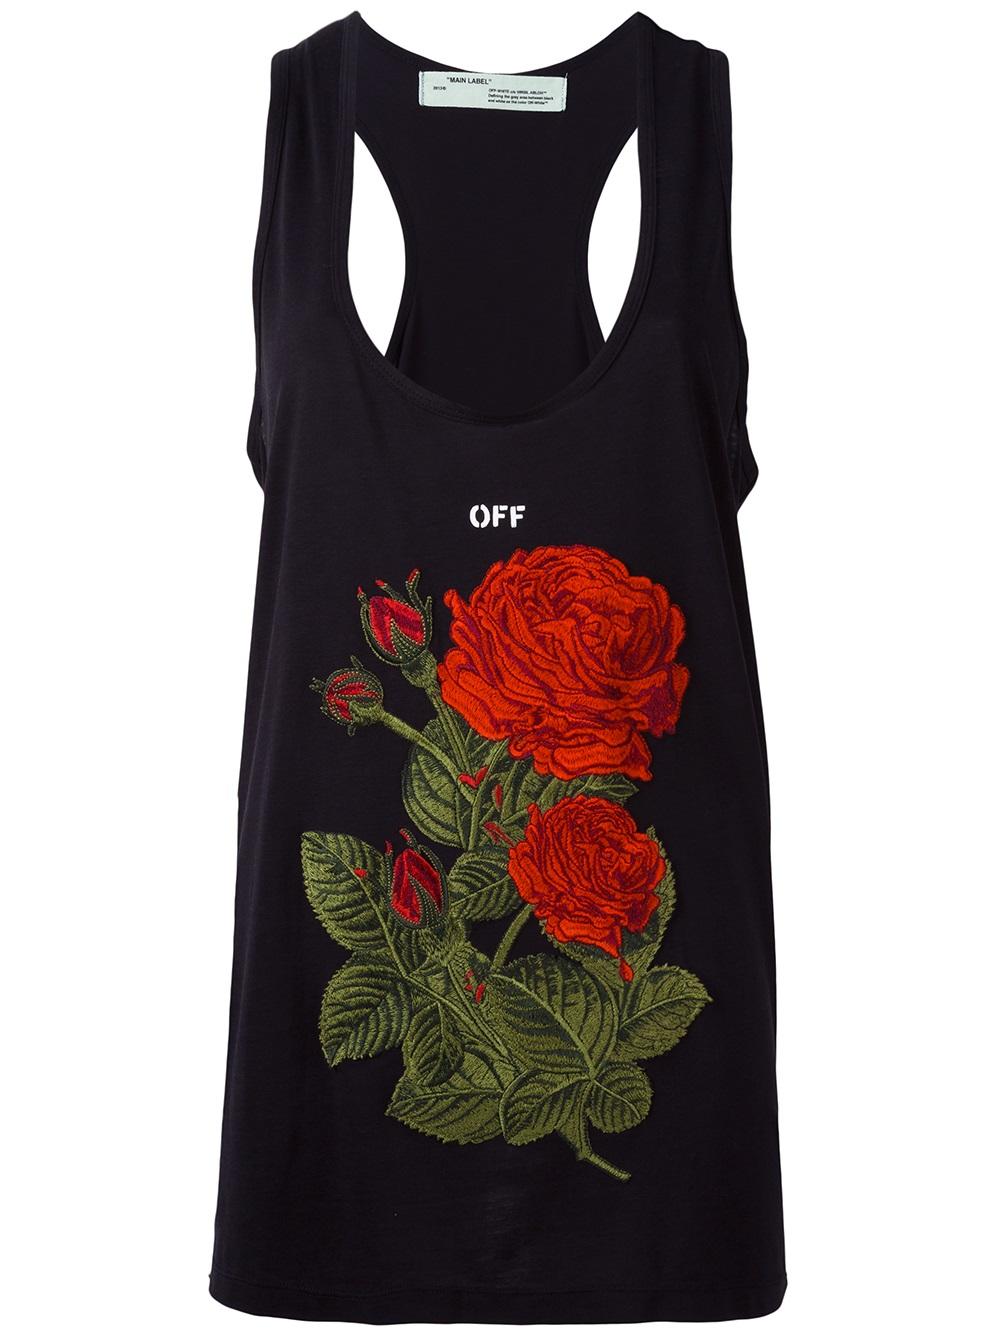 Off-White rose embroidery tank 100% high Quality Guarantee 1088 BLACK Women Clothing Vests & Tops